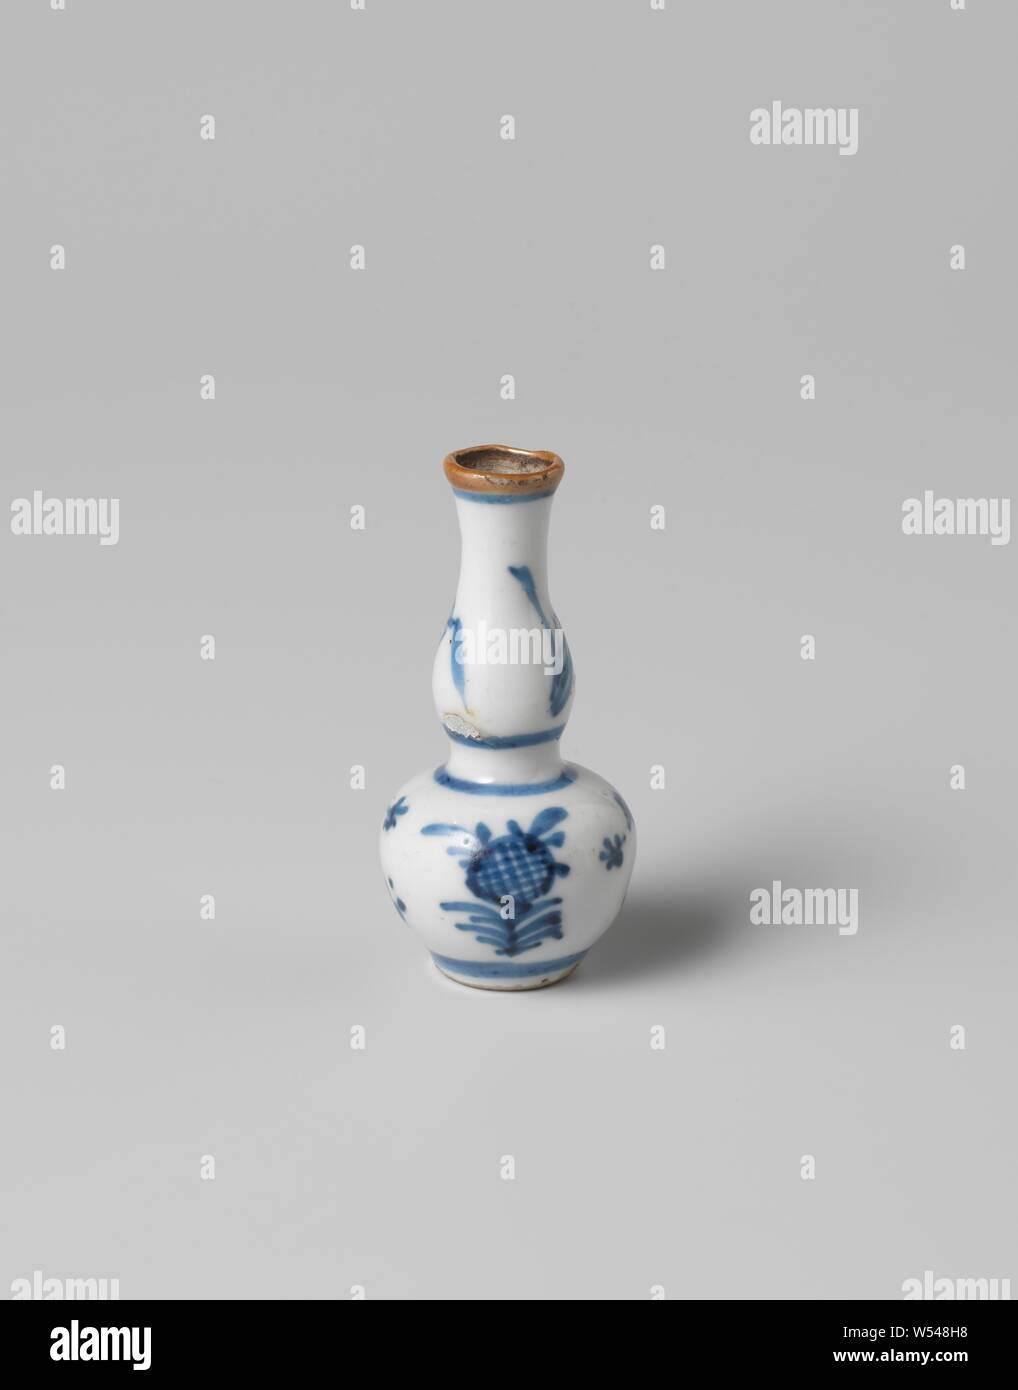 Miniature double-gourd-shaped vase with flowering plants, Miniature porcelain vase with gourd-shaped body, painted in underglaze blue. A flowering plant twice on the belly and neck, the edge with a brown glaze. Blue White., anonymous, China, c. 1675 - c. 1724, Qing-dynasty (1644-1912) / Kangxi-period (1662-1722) / Yongzheng-period (1723-1735), porcelain (material), glaze, cobalt (mineral), vitrification, h 6 cm d 0.8 cm d 3 cm d 1.6 cm Stock Photo